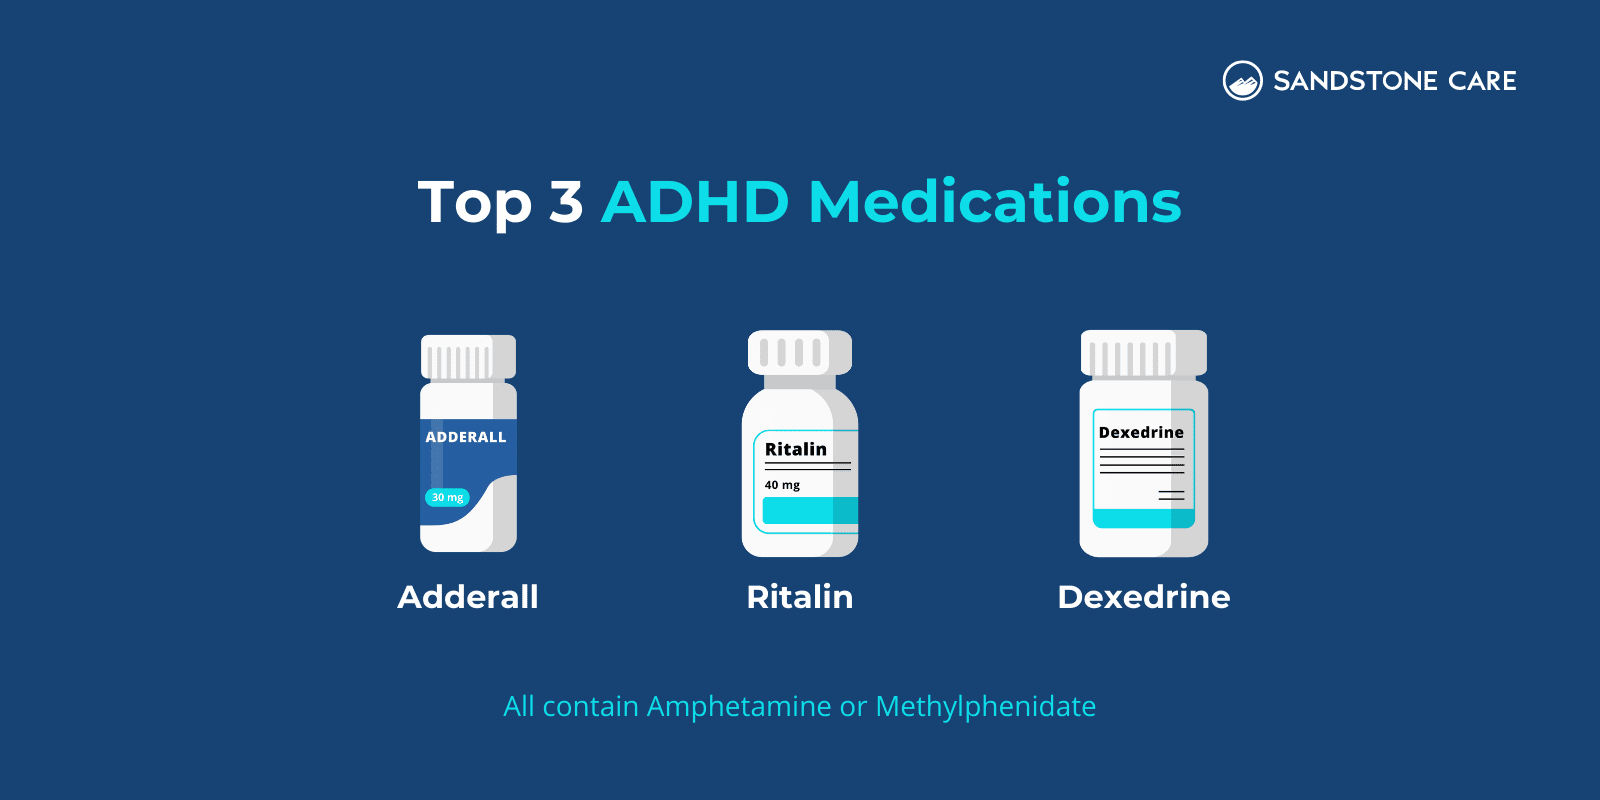 Top 3 ADHD Medications listed with digital illustration of the pill bottles